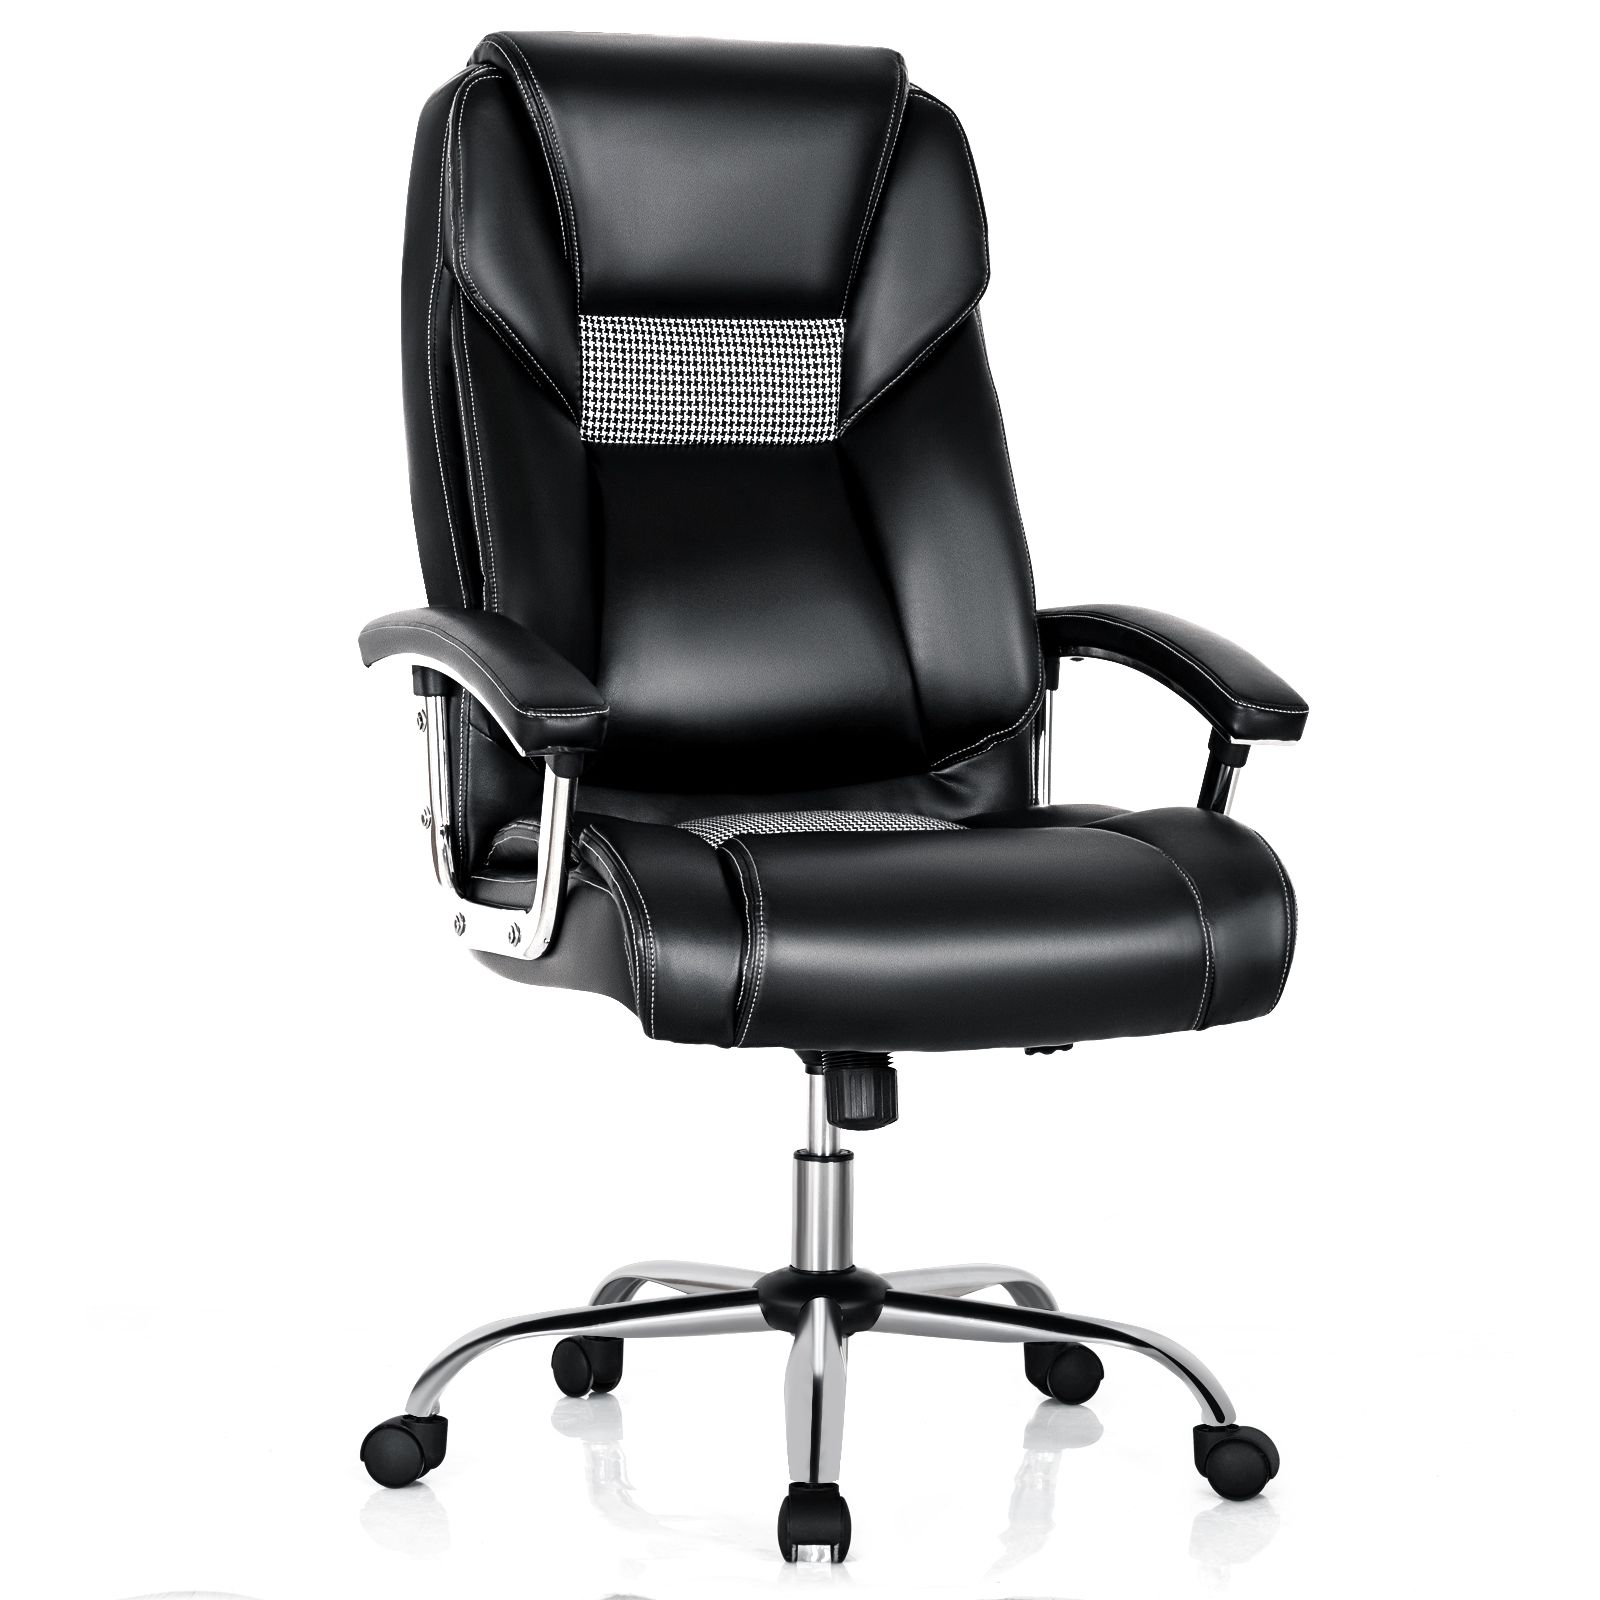 PVC Leather High-back Executive Chair with Padded Armrests